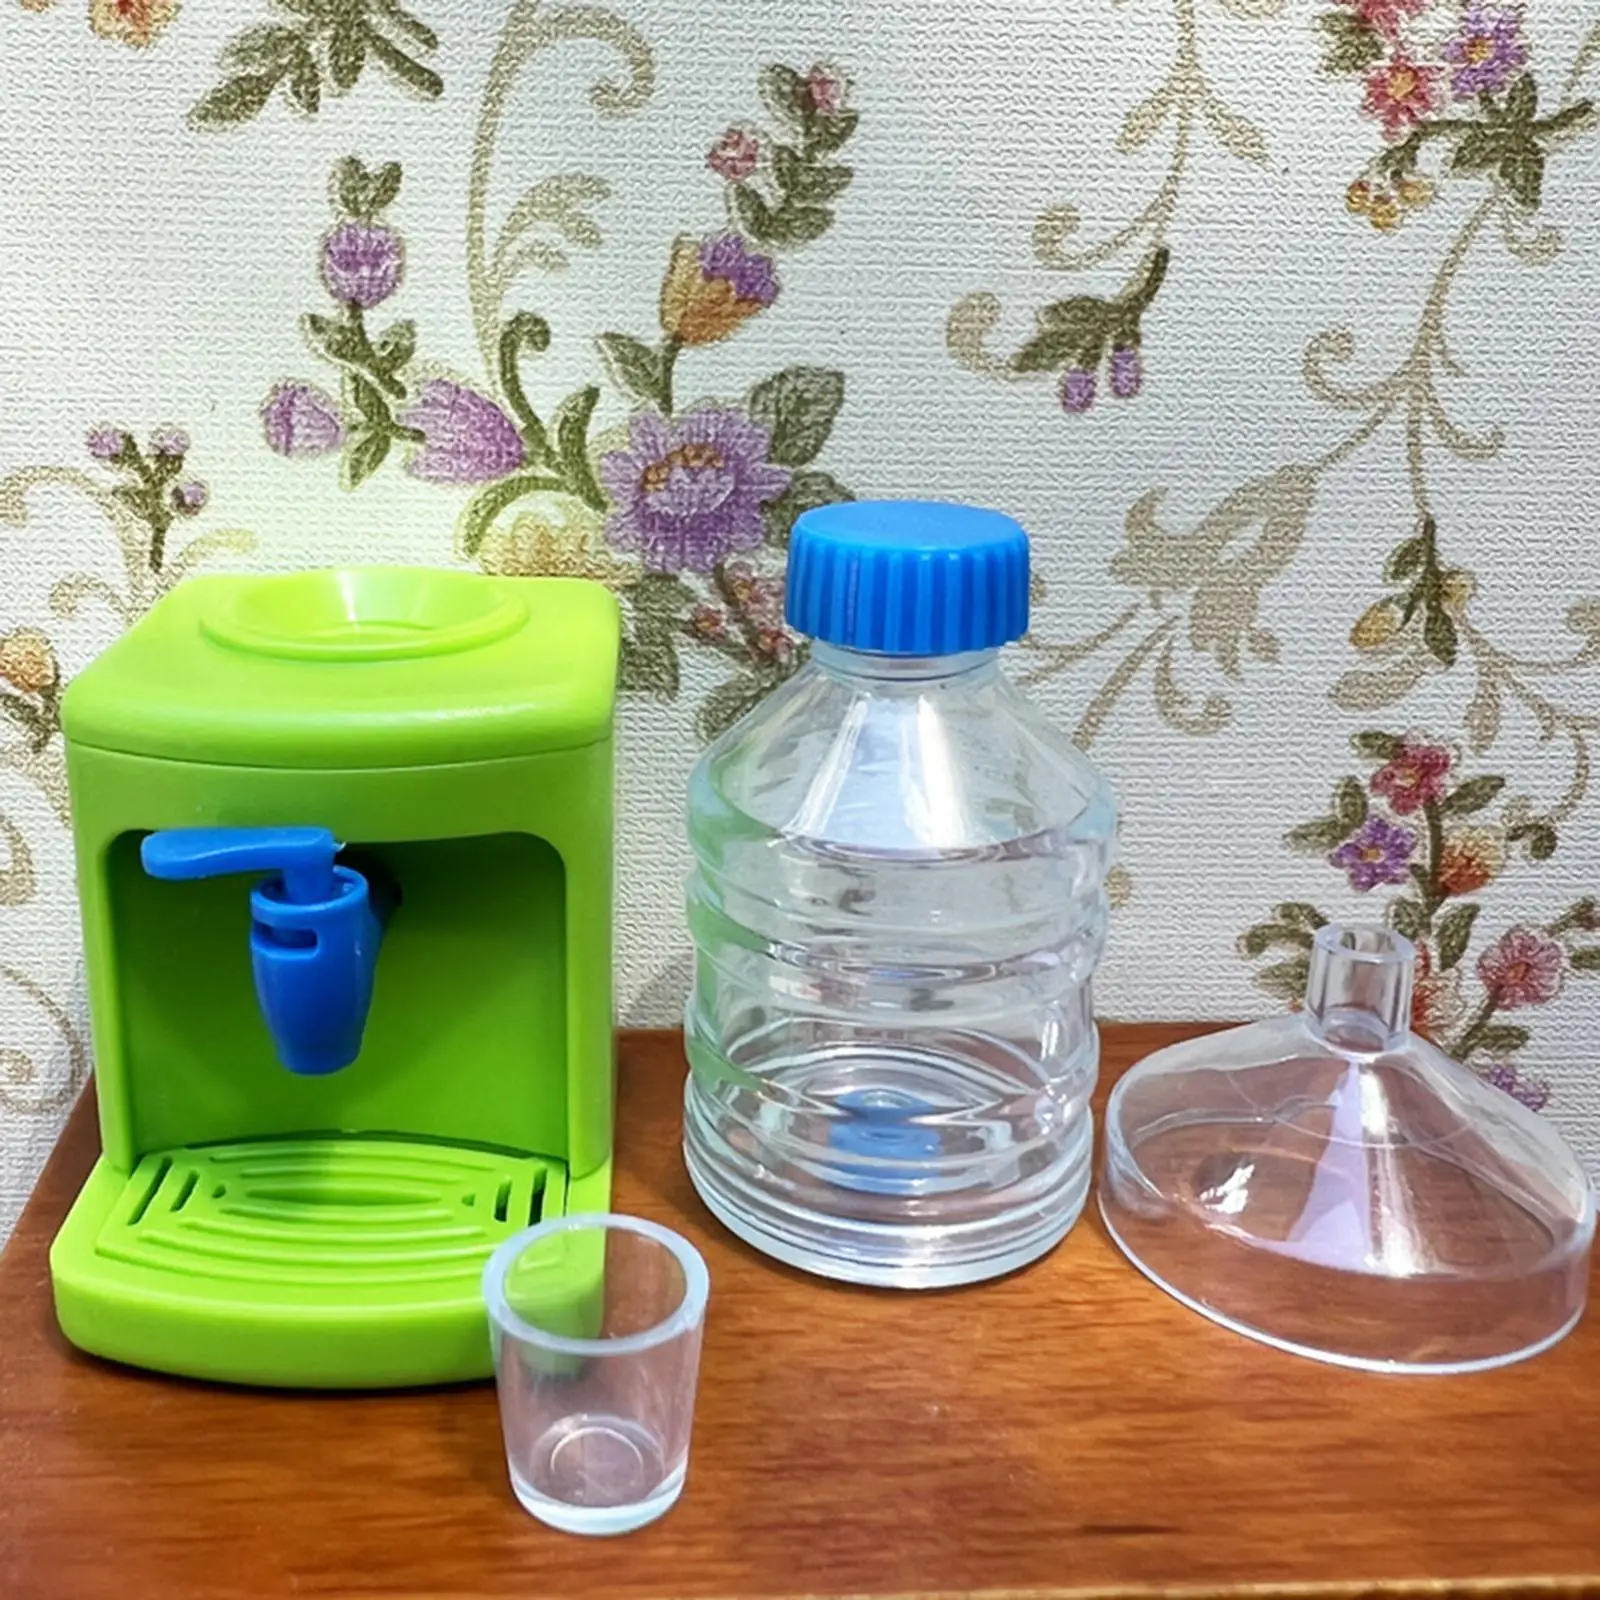 Mini Drinking life Scene with Bottle Cup Funnel Kitchen Living Room Furniture 1:12 Dollhouse Water Dispenser Decoration